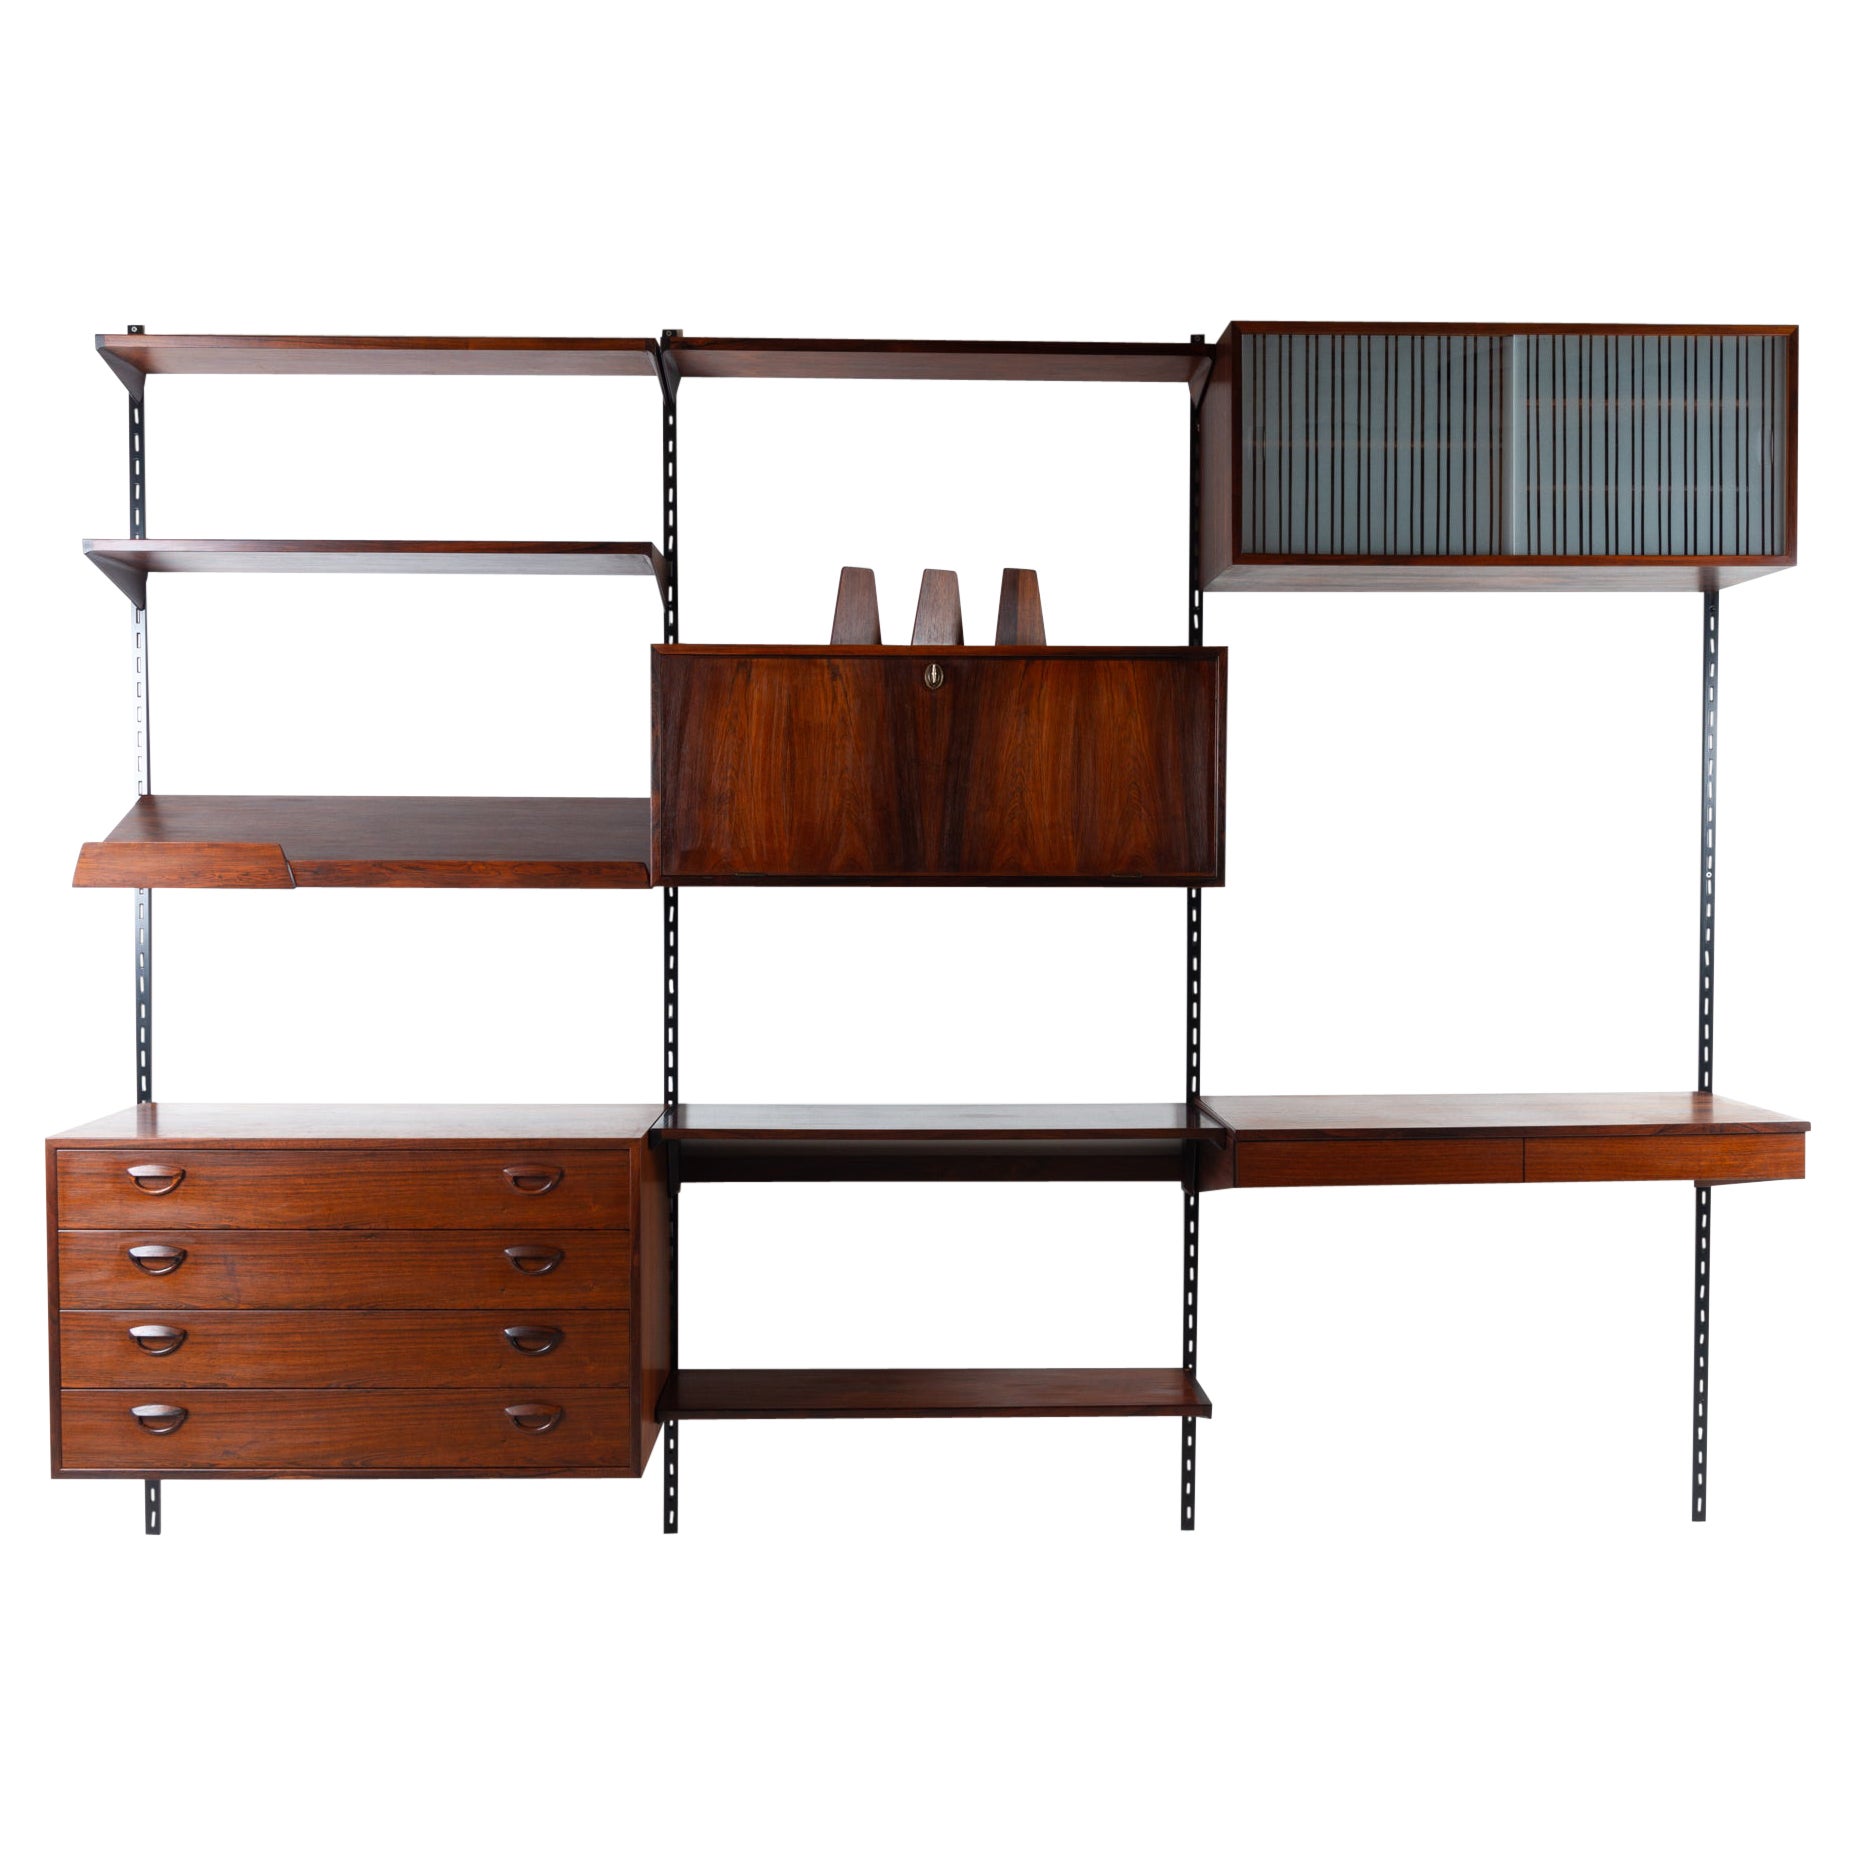 Vintage Danish Rosewood Wall Unit by Kai Kristiansen for FM 1960s